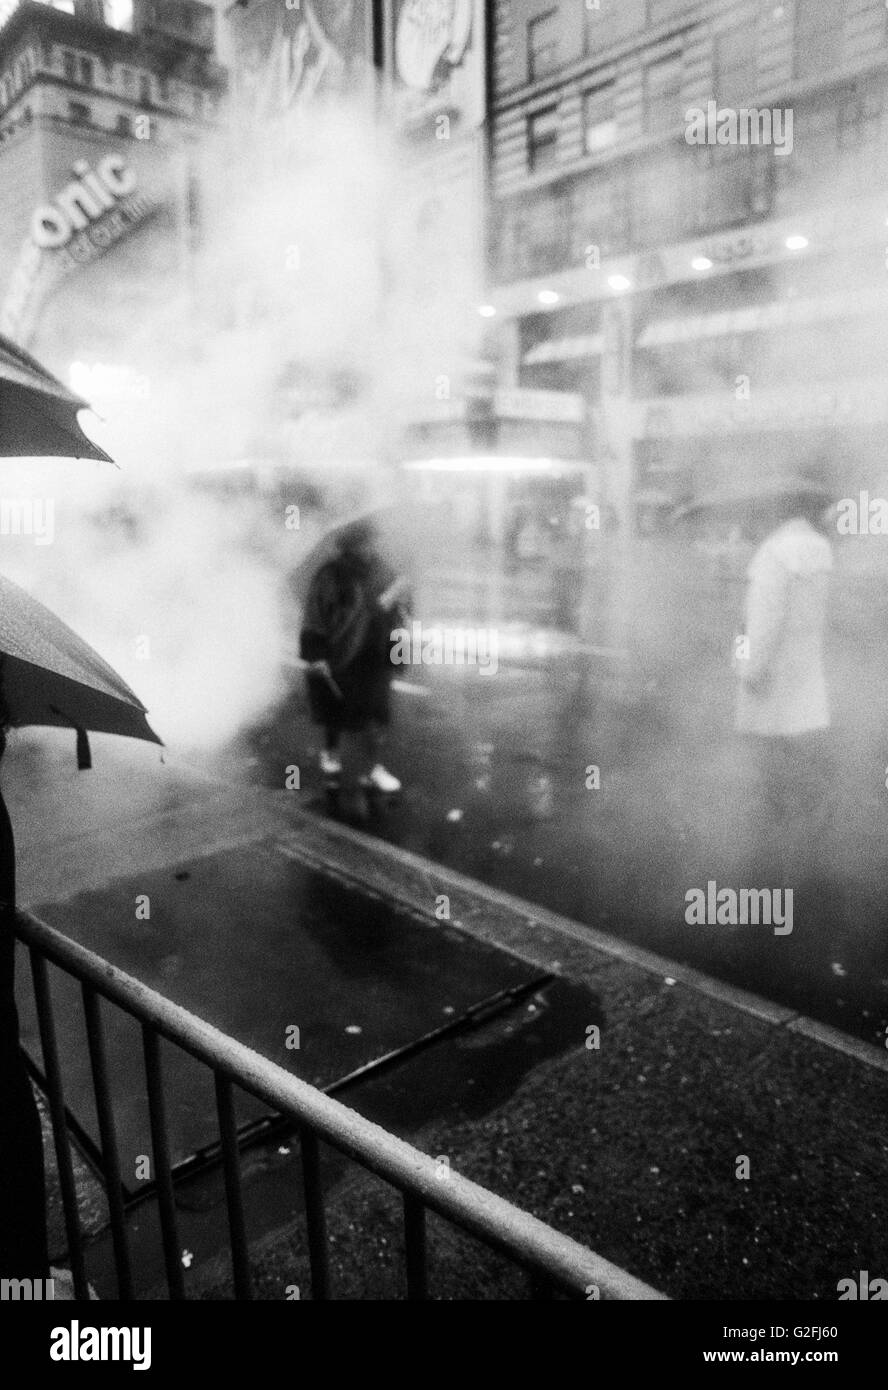 People Walking with Umbrellas in Foggy Rain, Times Square, New York City, USA Stock Photo